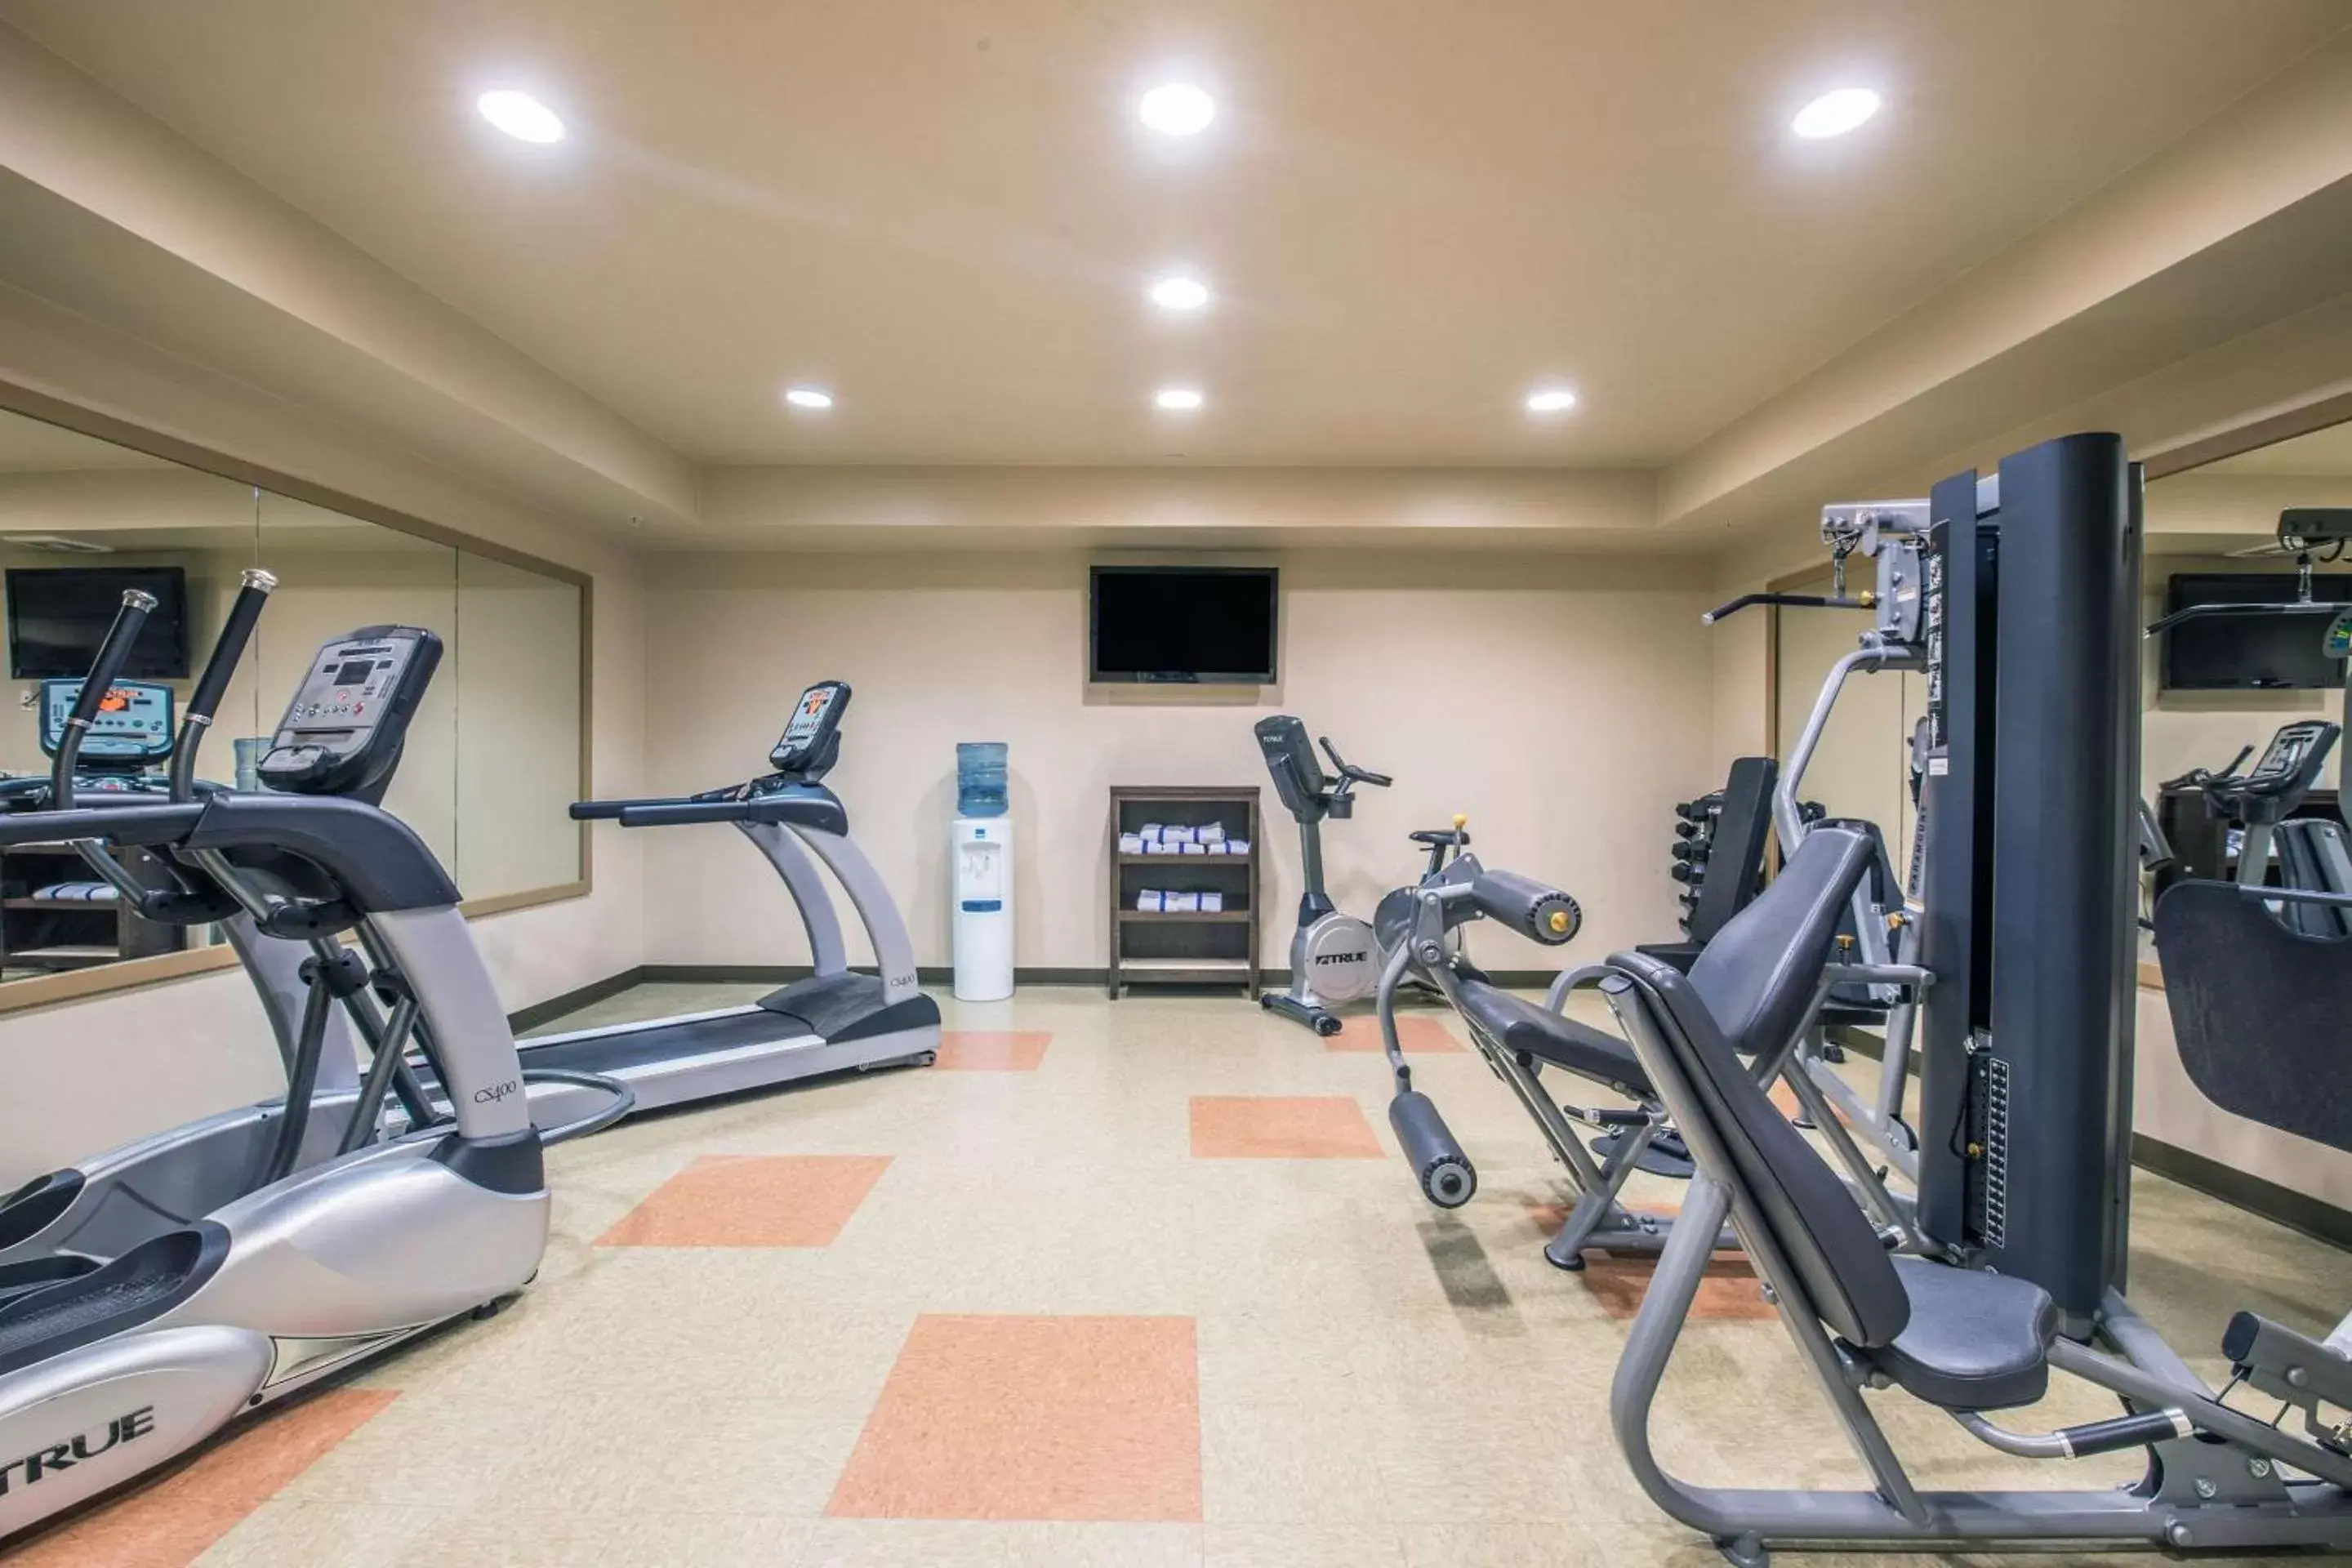 Fitness centre/facilities, Fitness Center/Facilities in Clarion Hotel & Suites Near Pioneer Power Generating Station